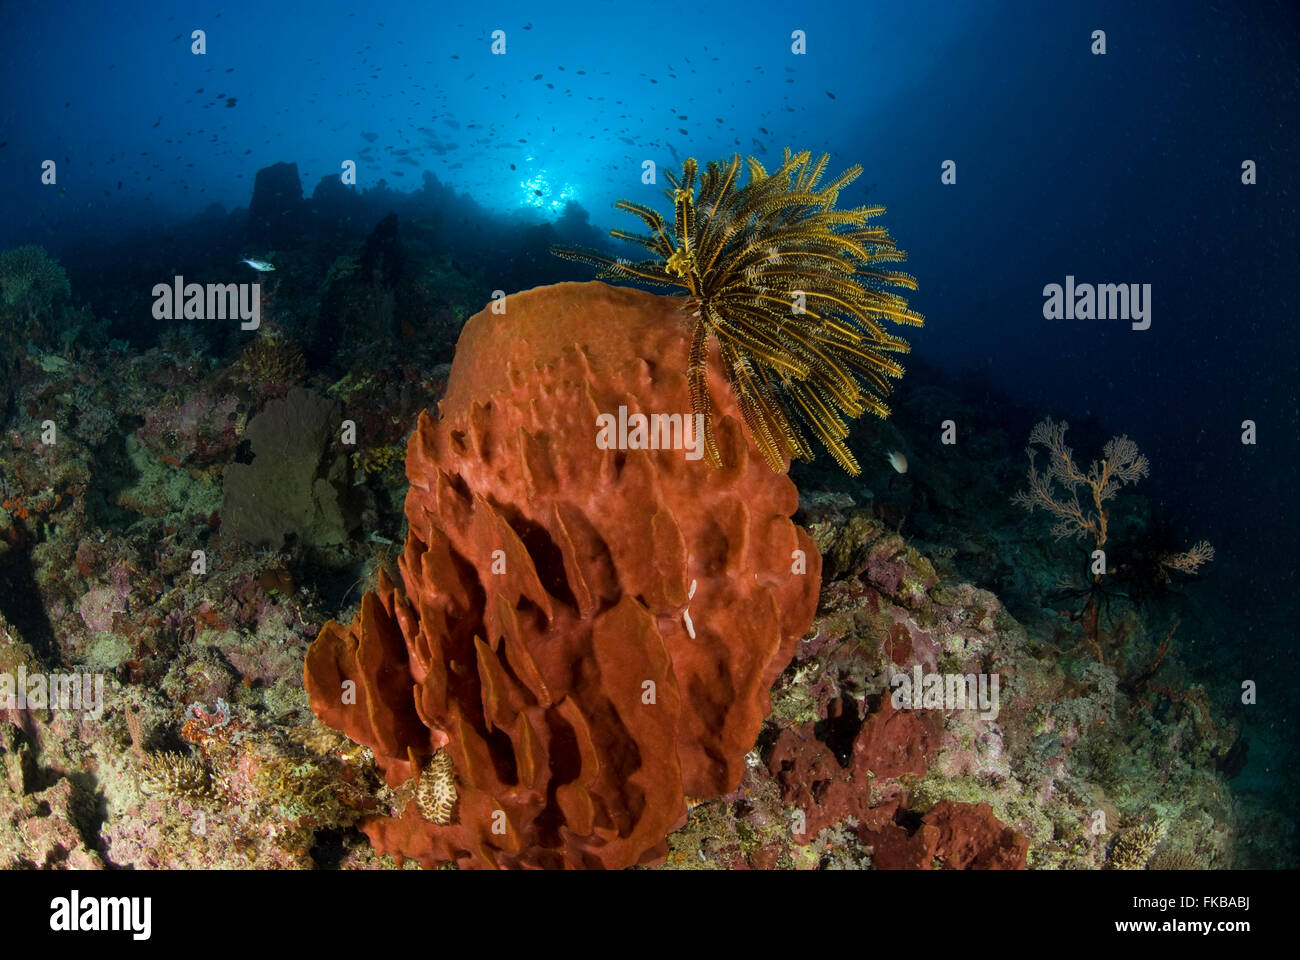 Big barrel sponge with a featherstar in coral reef Stock Photo